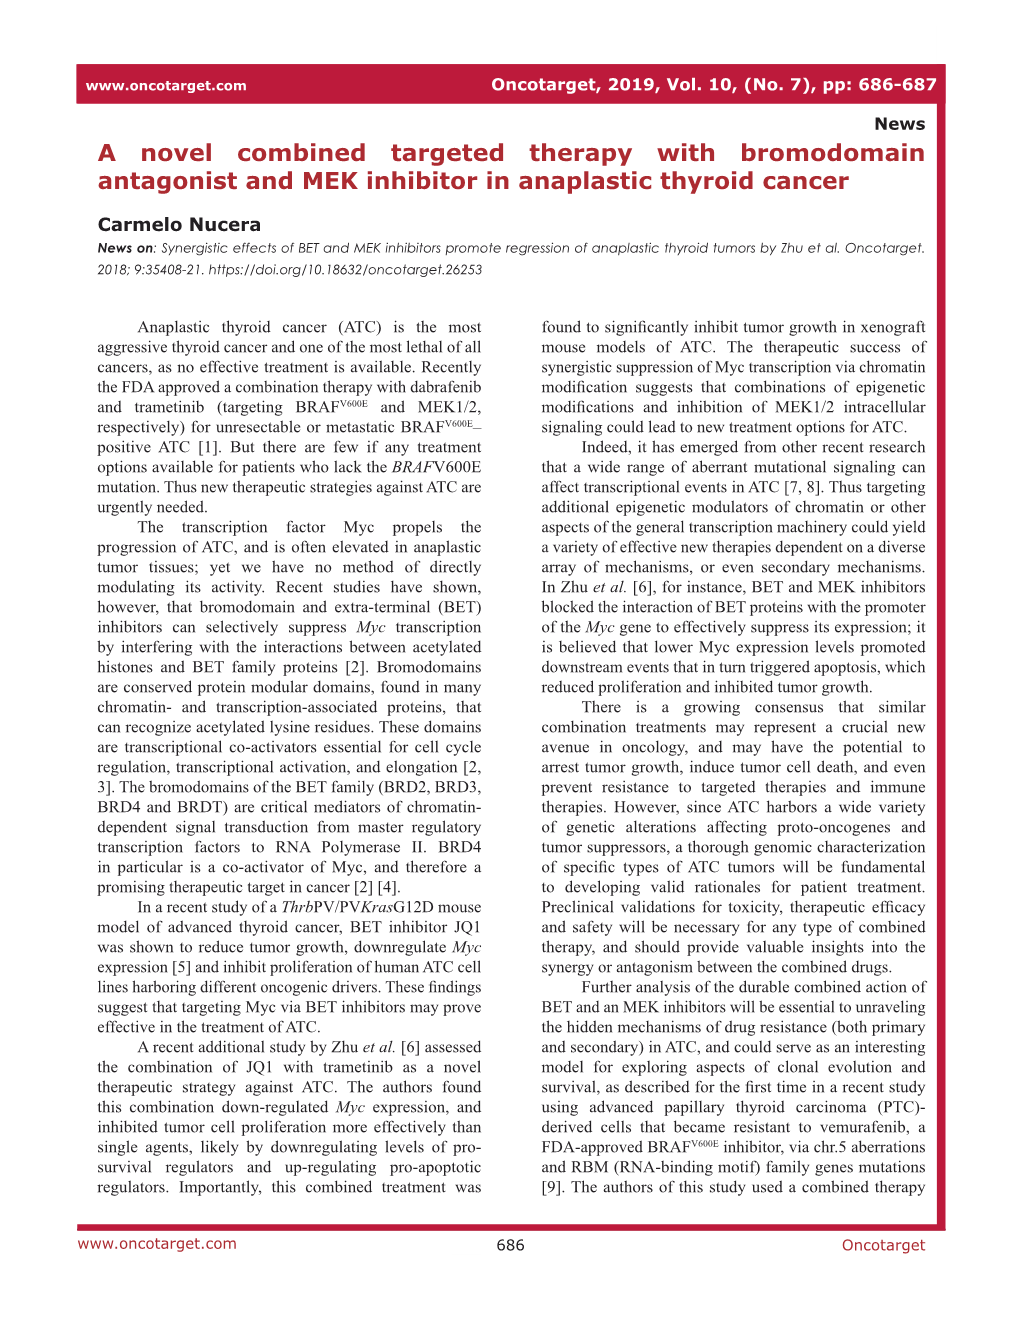 A Novel Combined Targeted Therapy with Bromodomain Antagonist and MEK Inhibitor in Anaplastic Thyroid Cancer